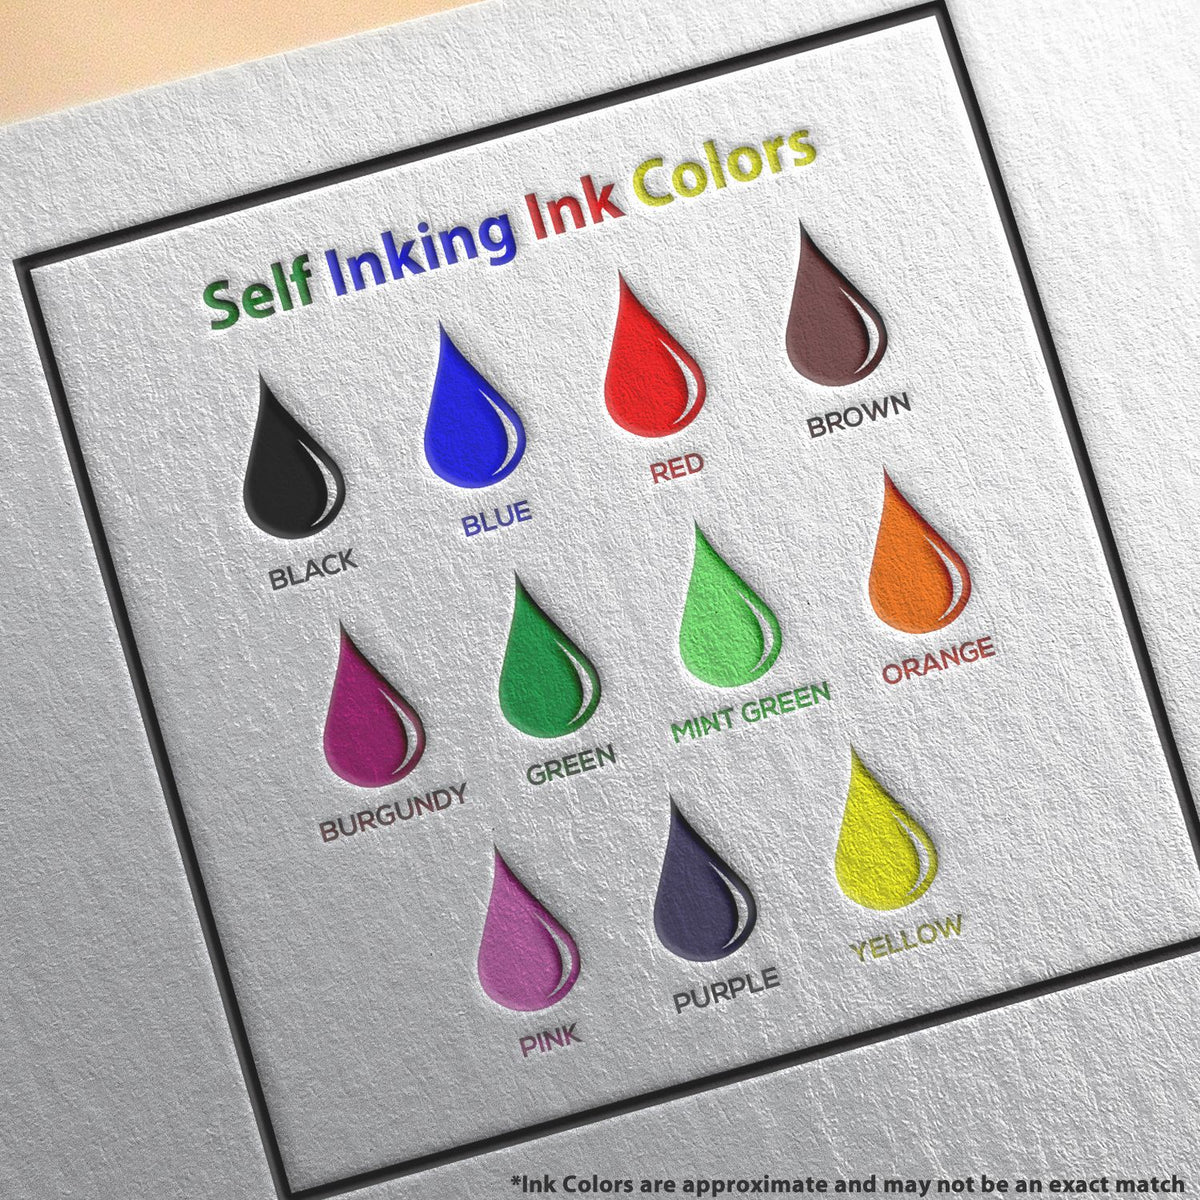 A picture showing the different ink colors or hues available for the Self-Inking Washington Landscape Architect Stamp product.